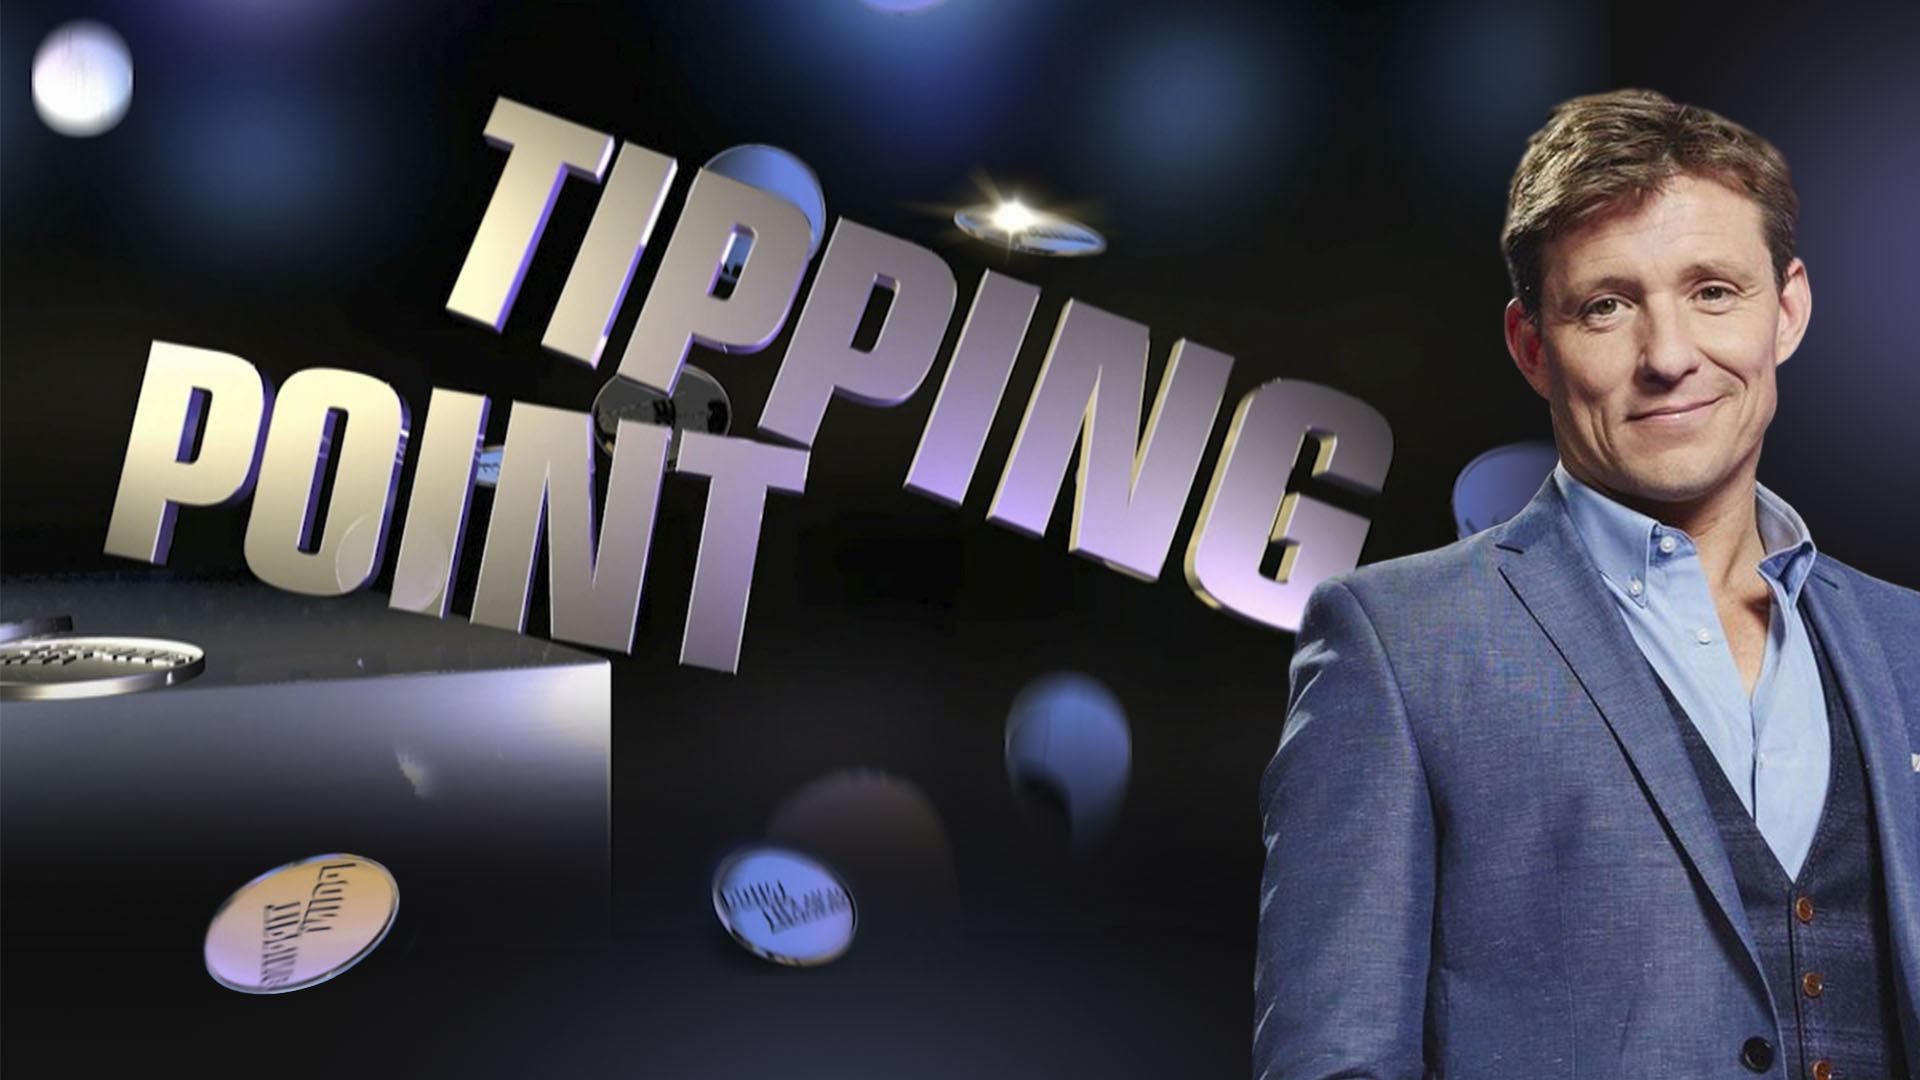 Watch Tipping Point live or ondemand Freeview Australia